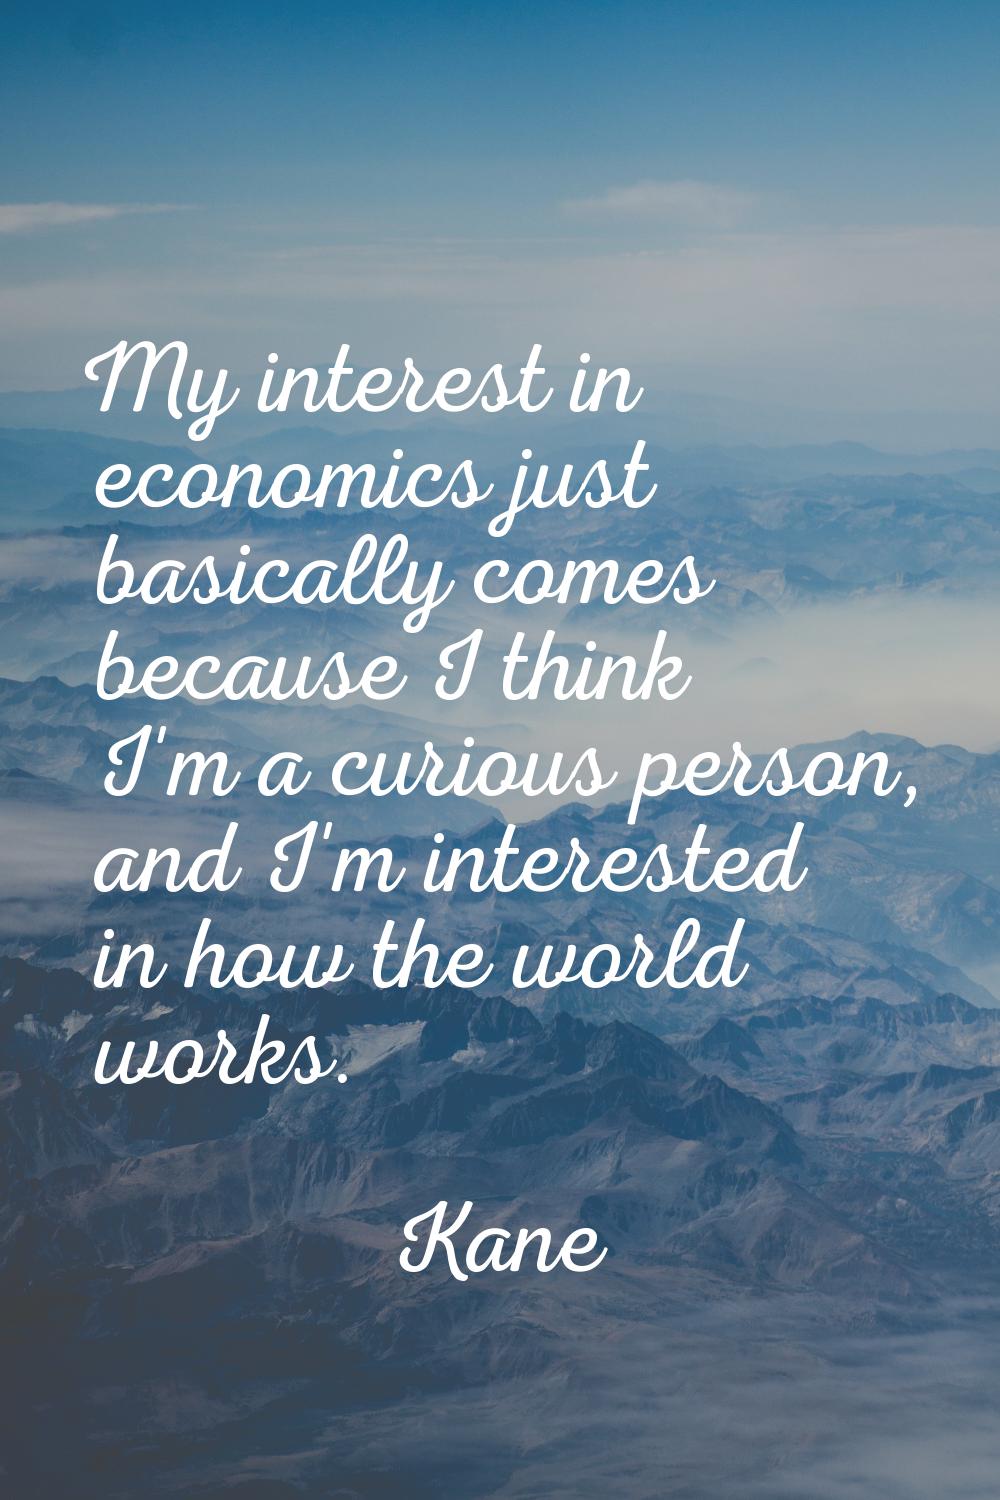 My interest in economics just basically comes because I think I'm a curious person, and I'm interes